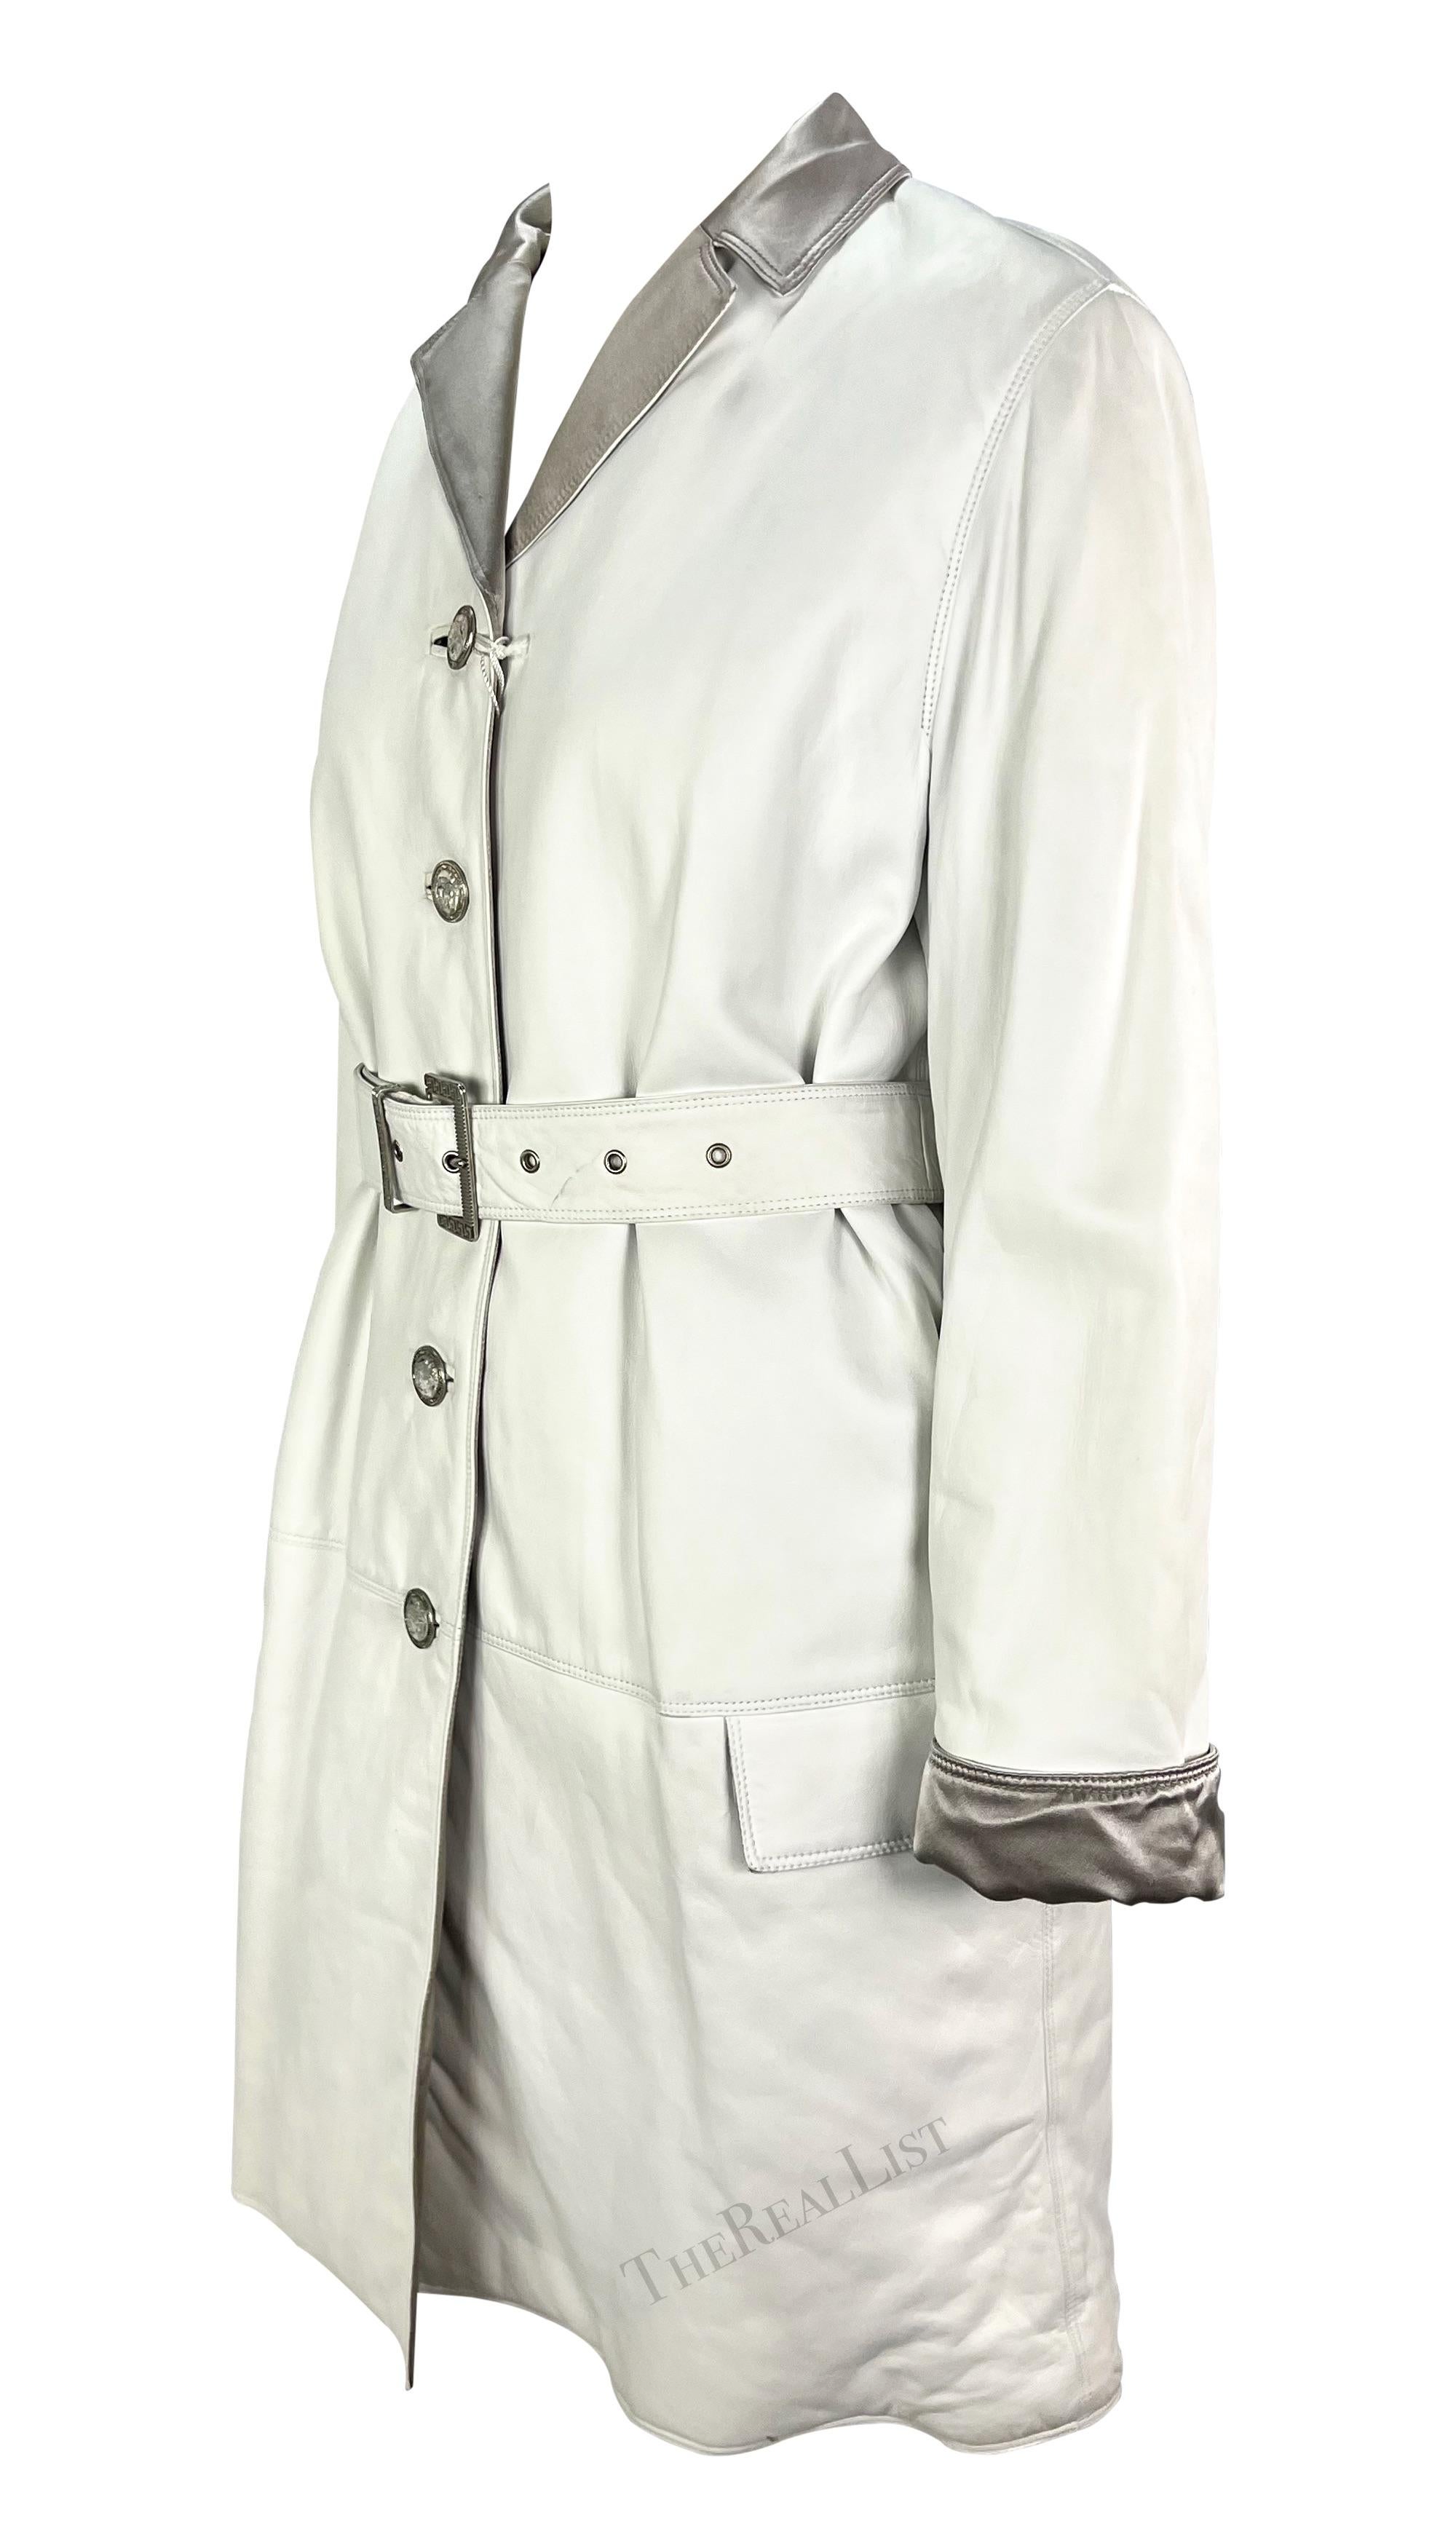 NWT F/W 1995 Gianni Versace Runway White Leather Silver Satin Medusa Car Coat For Sale 4